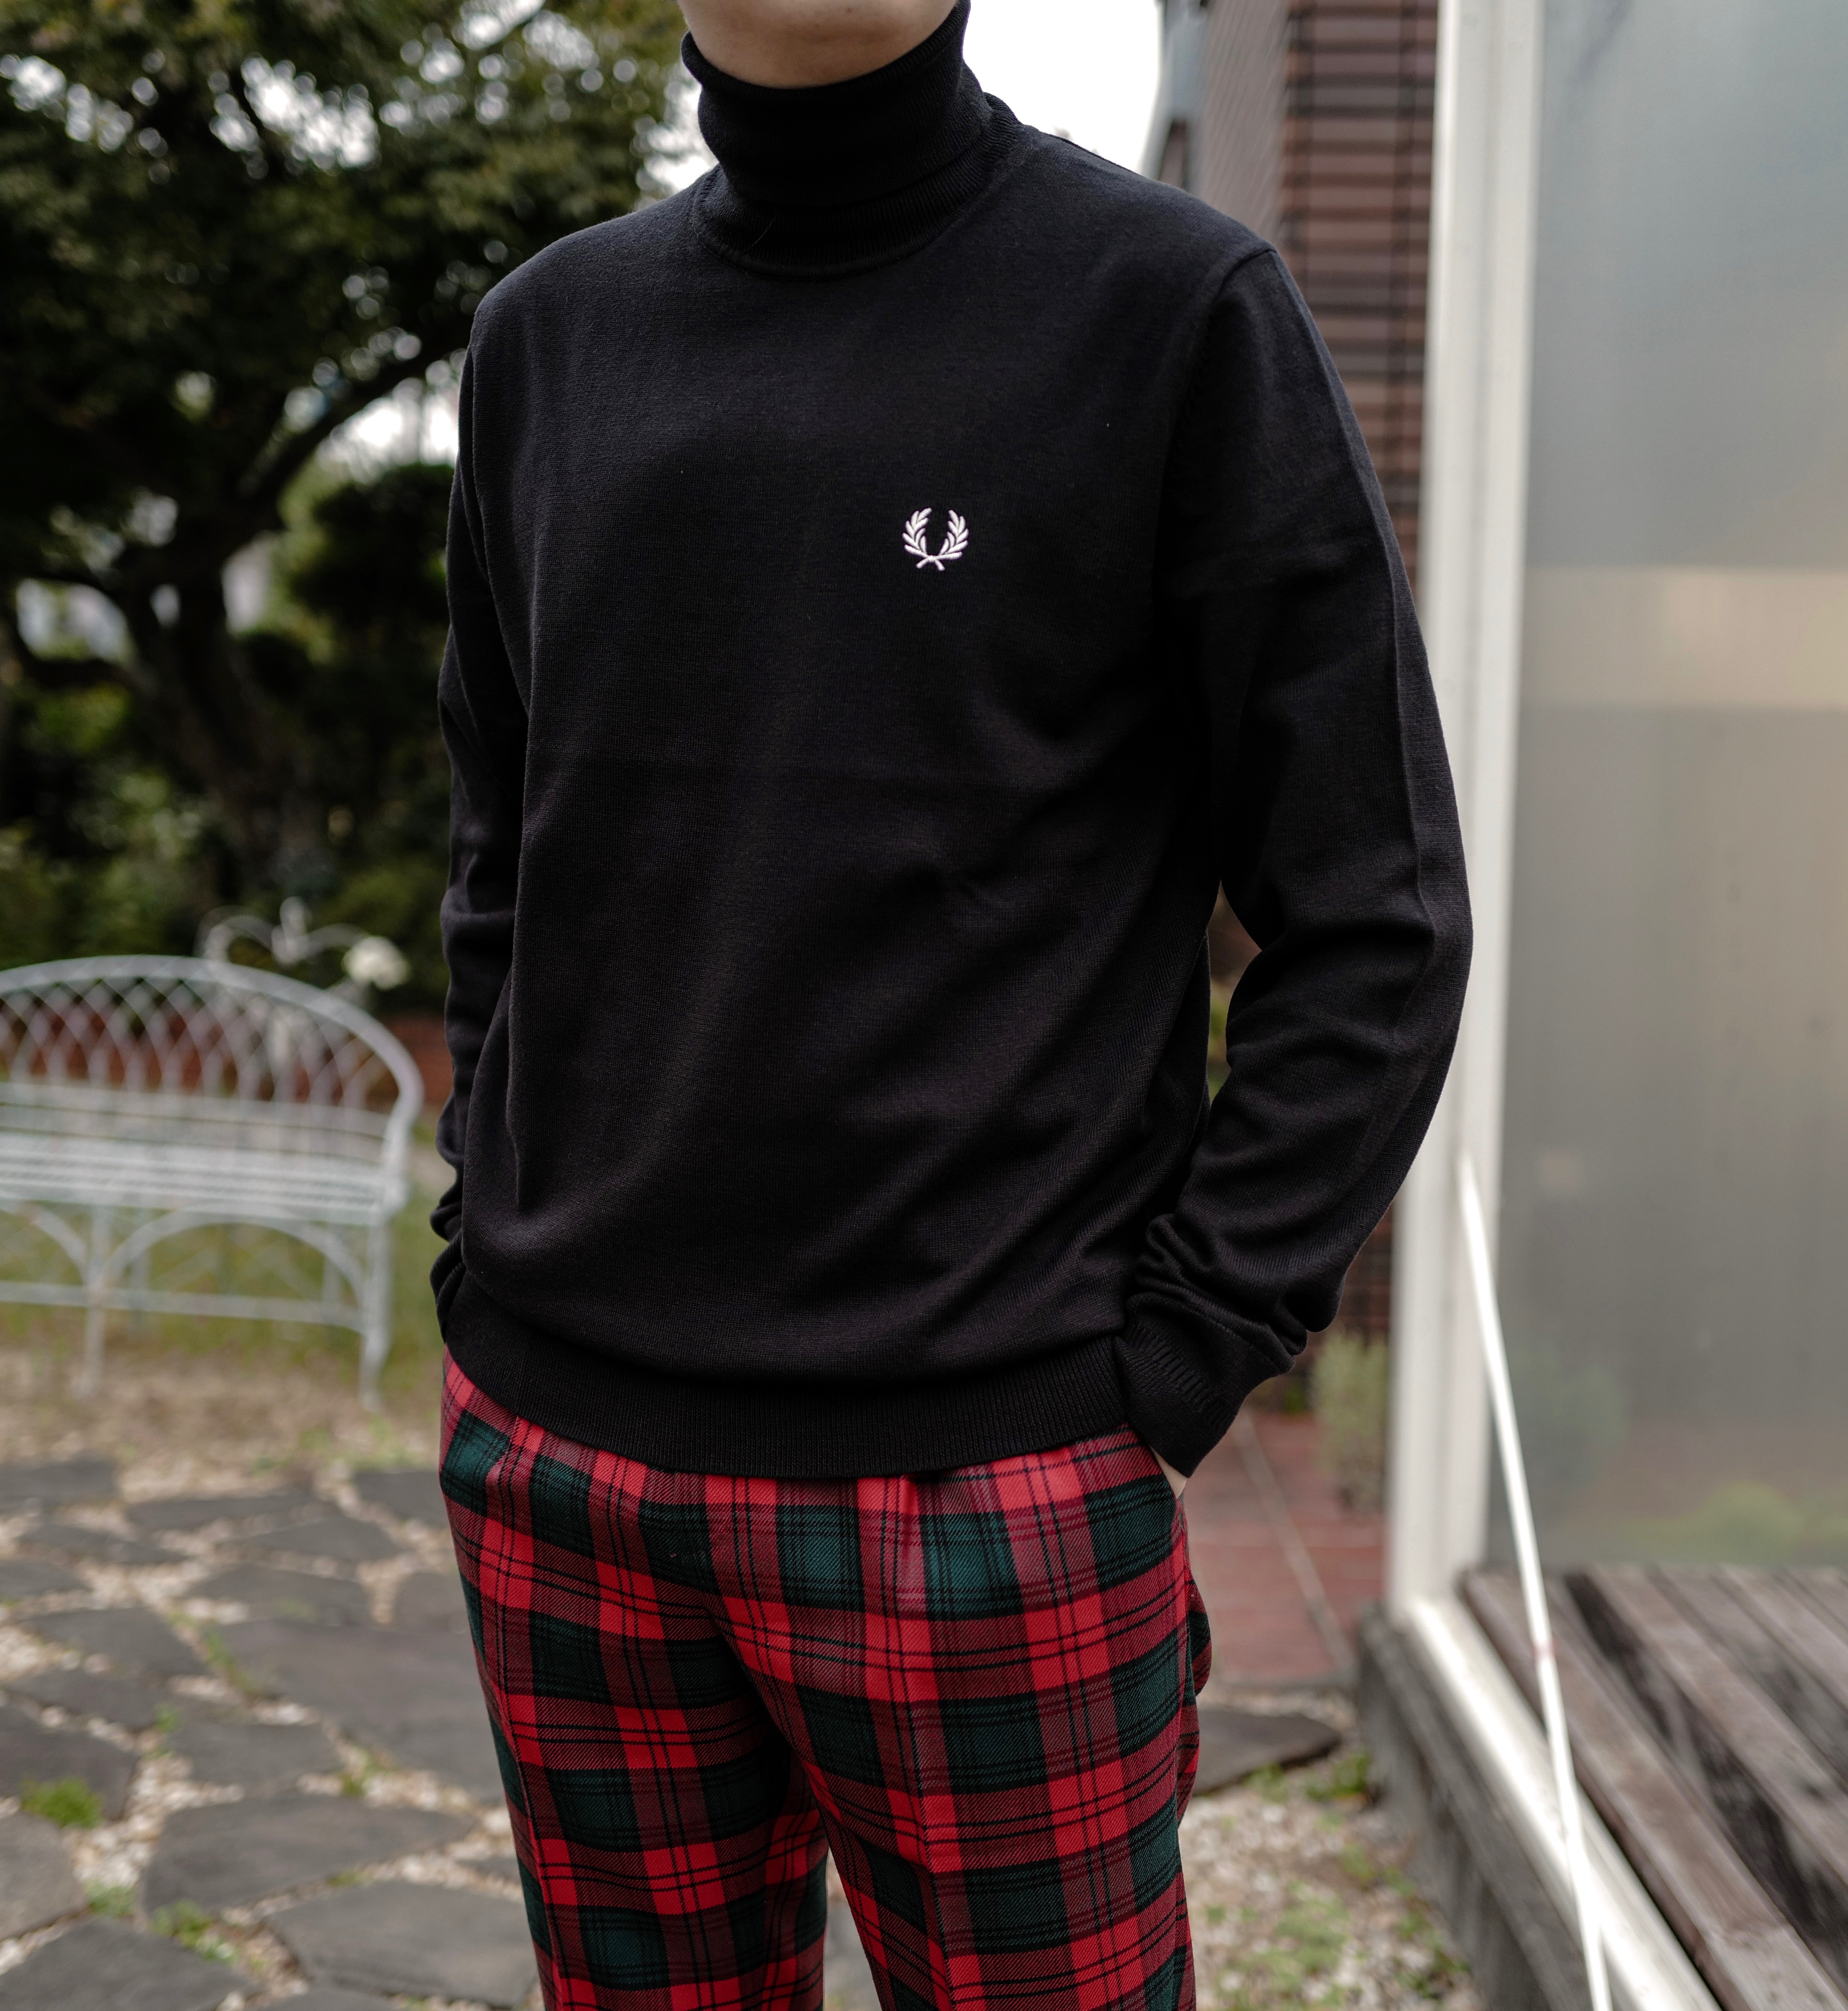 FRED PERRY　タートルネック